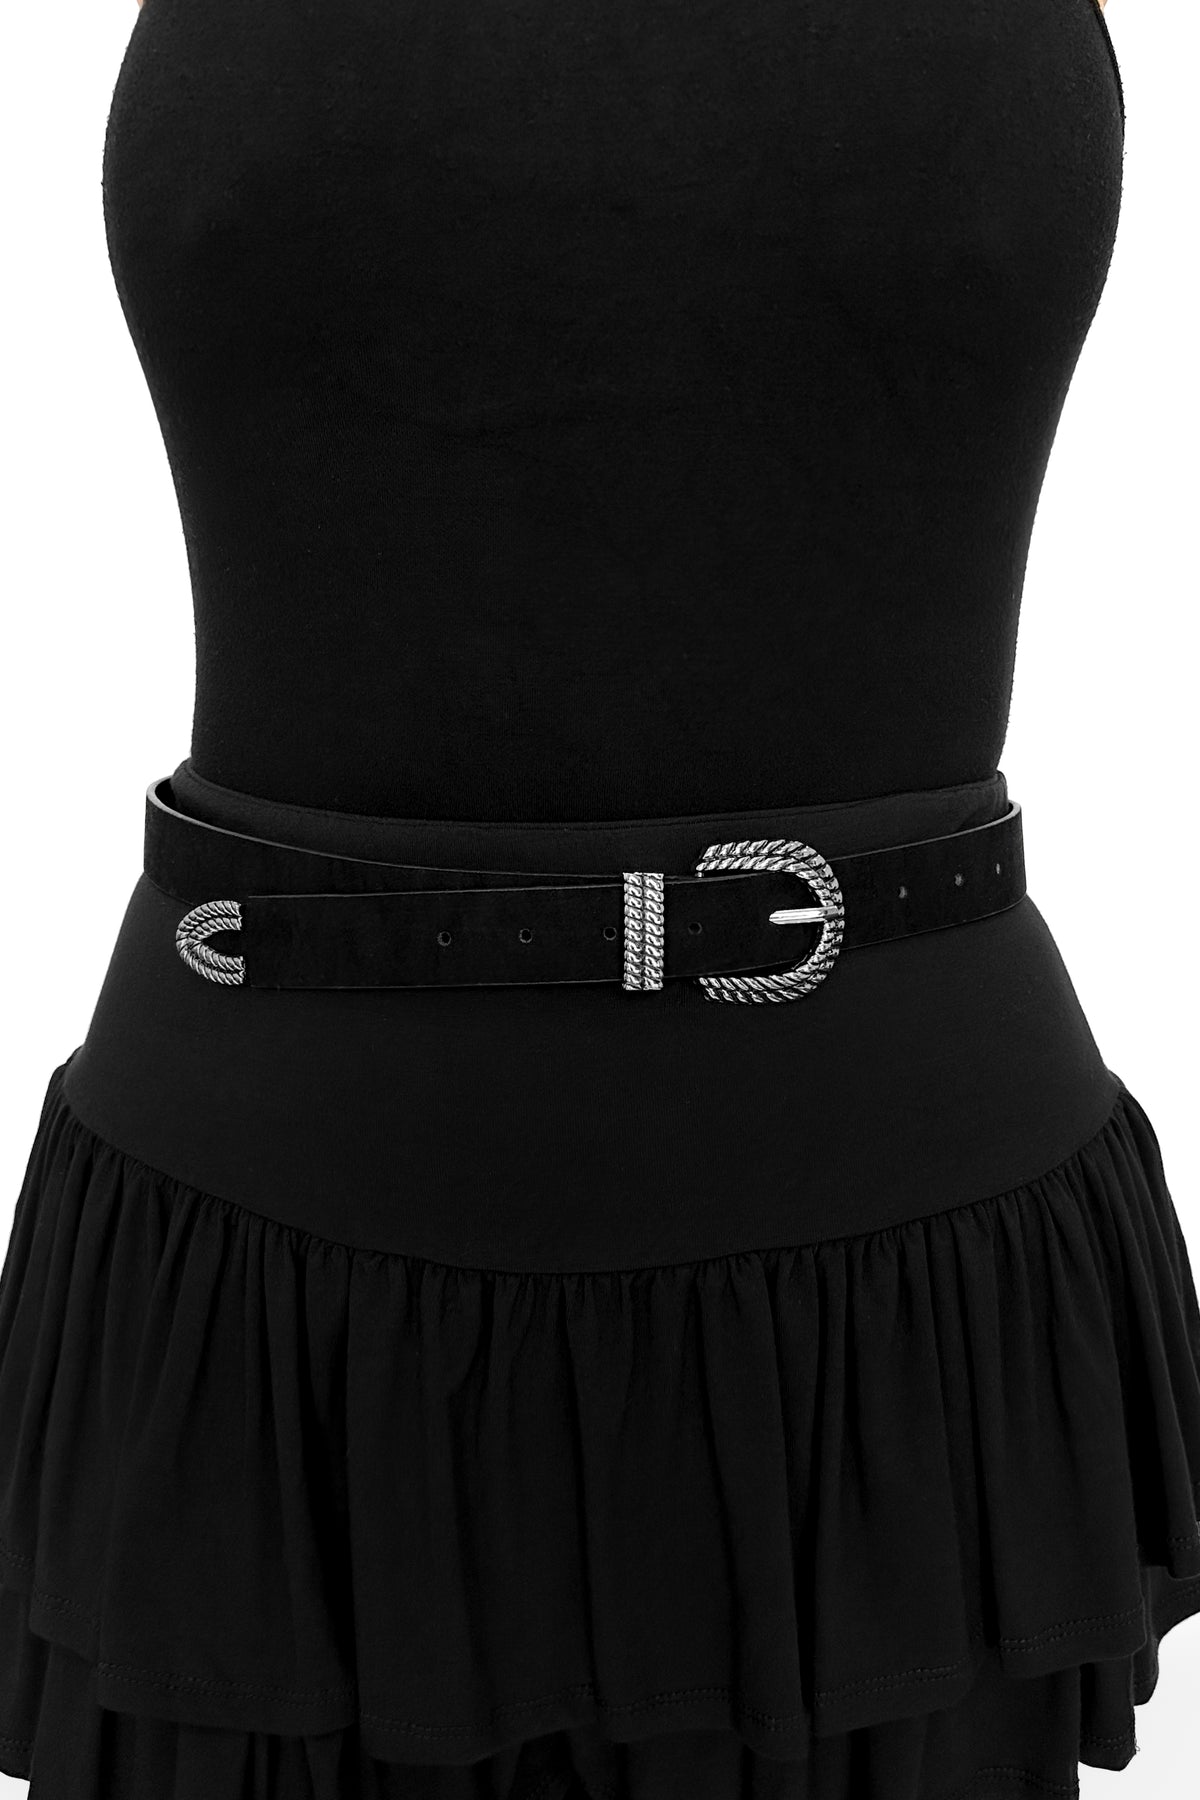 black flocked faux leather belt with braided silver metal buckle